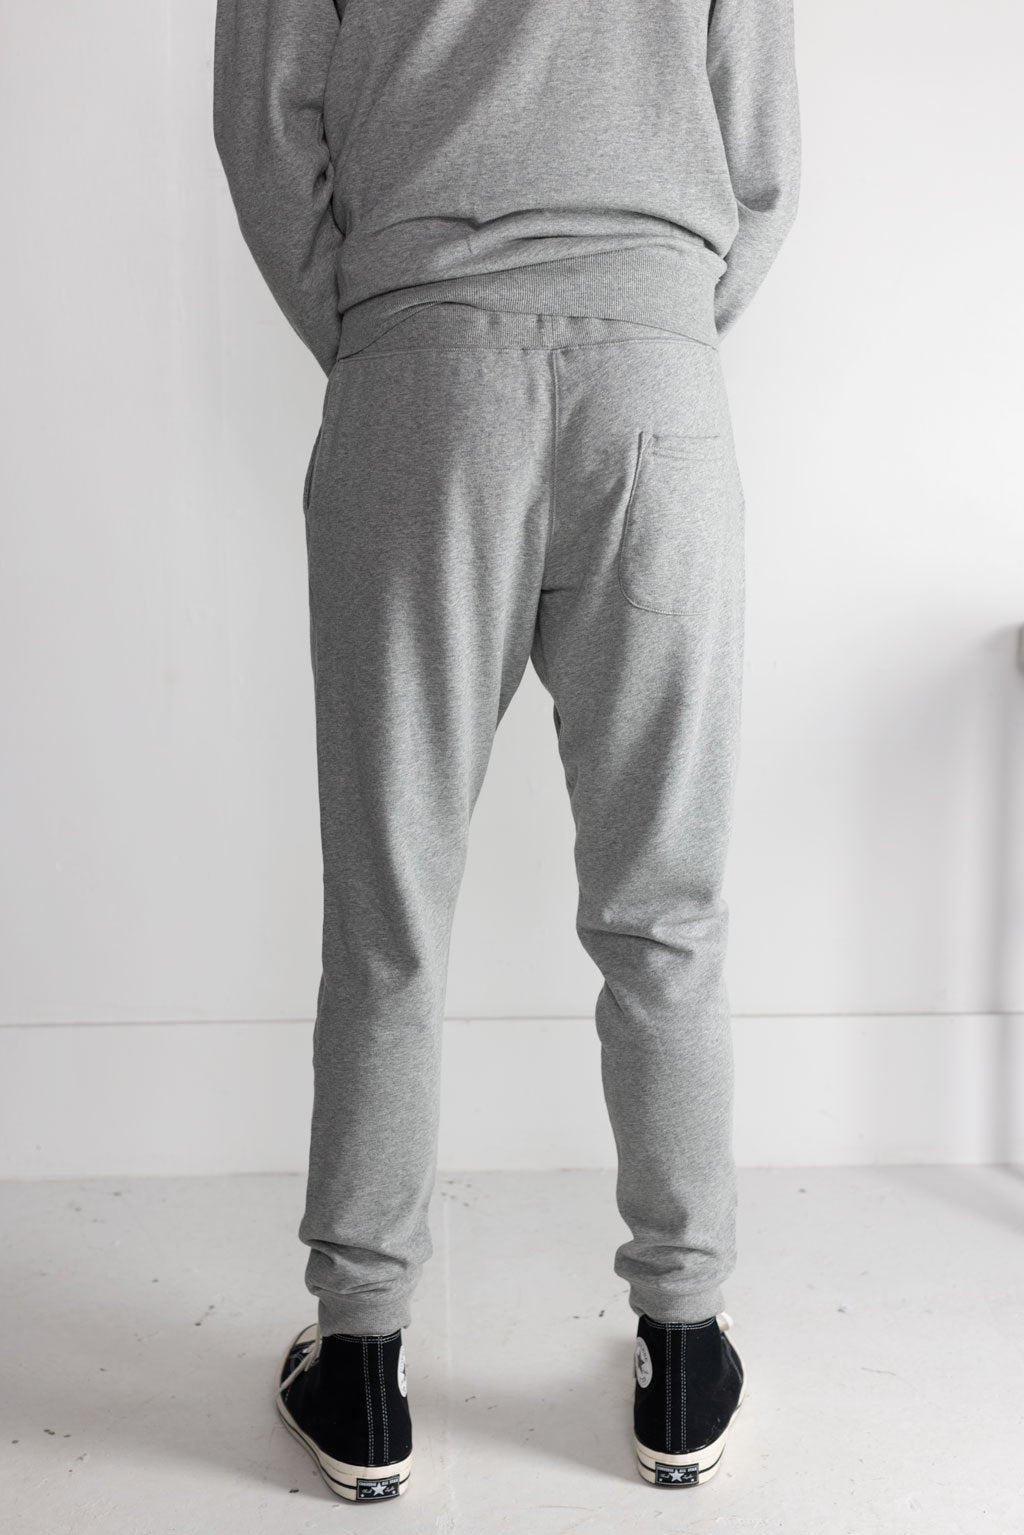 NS2167-3 250g French Terry Sweatpants in Melange Grey 03